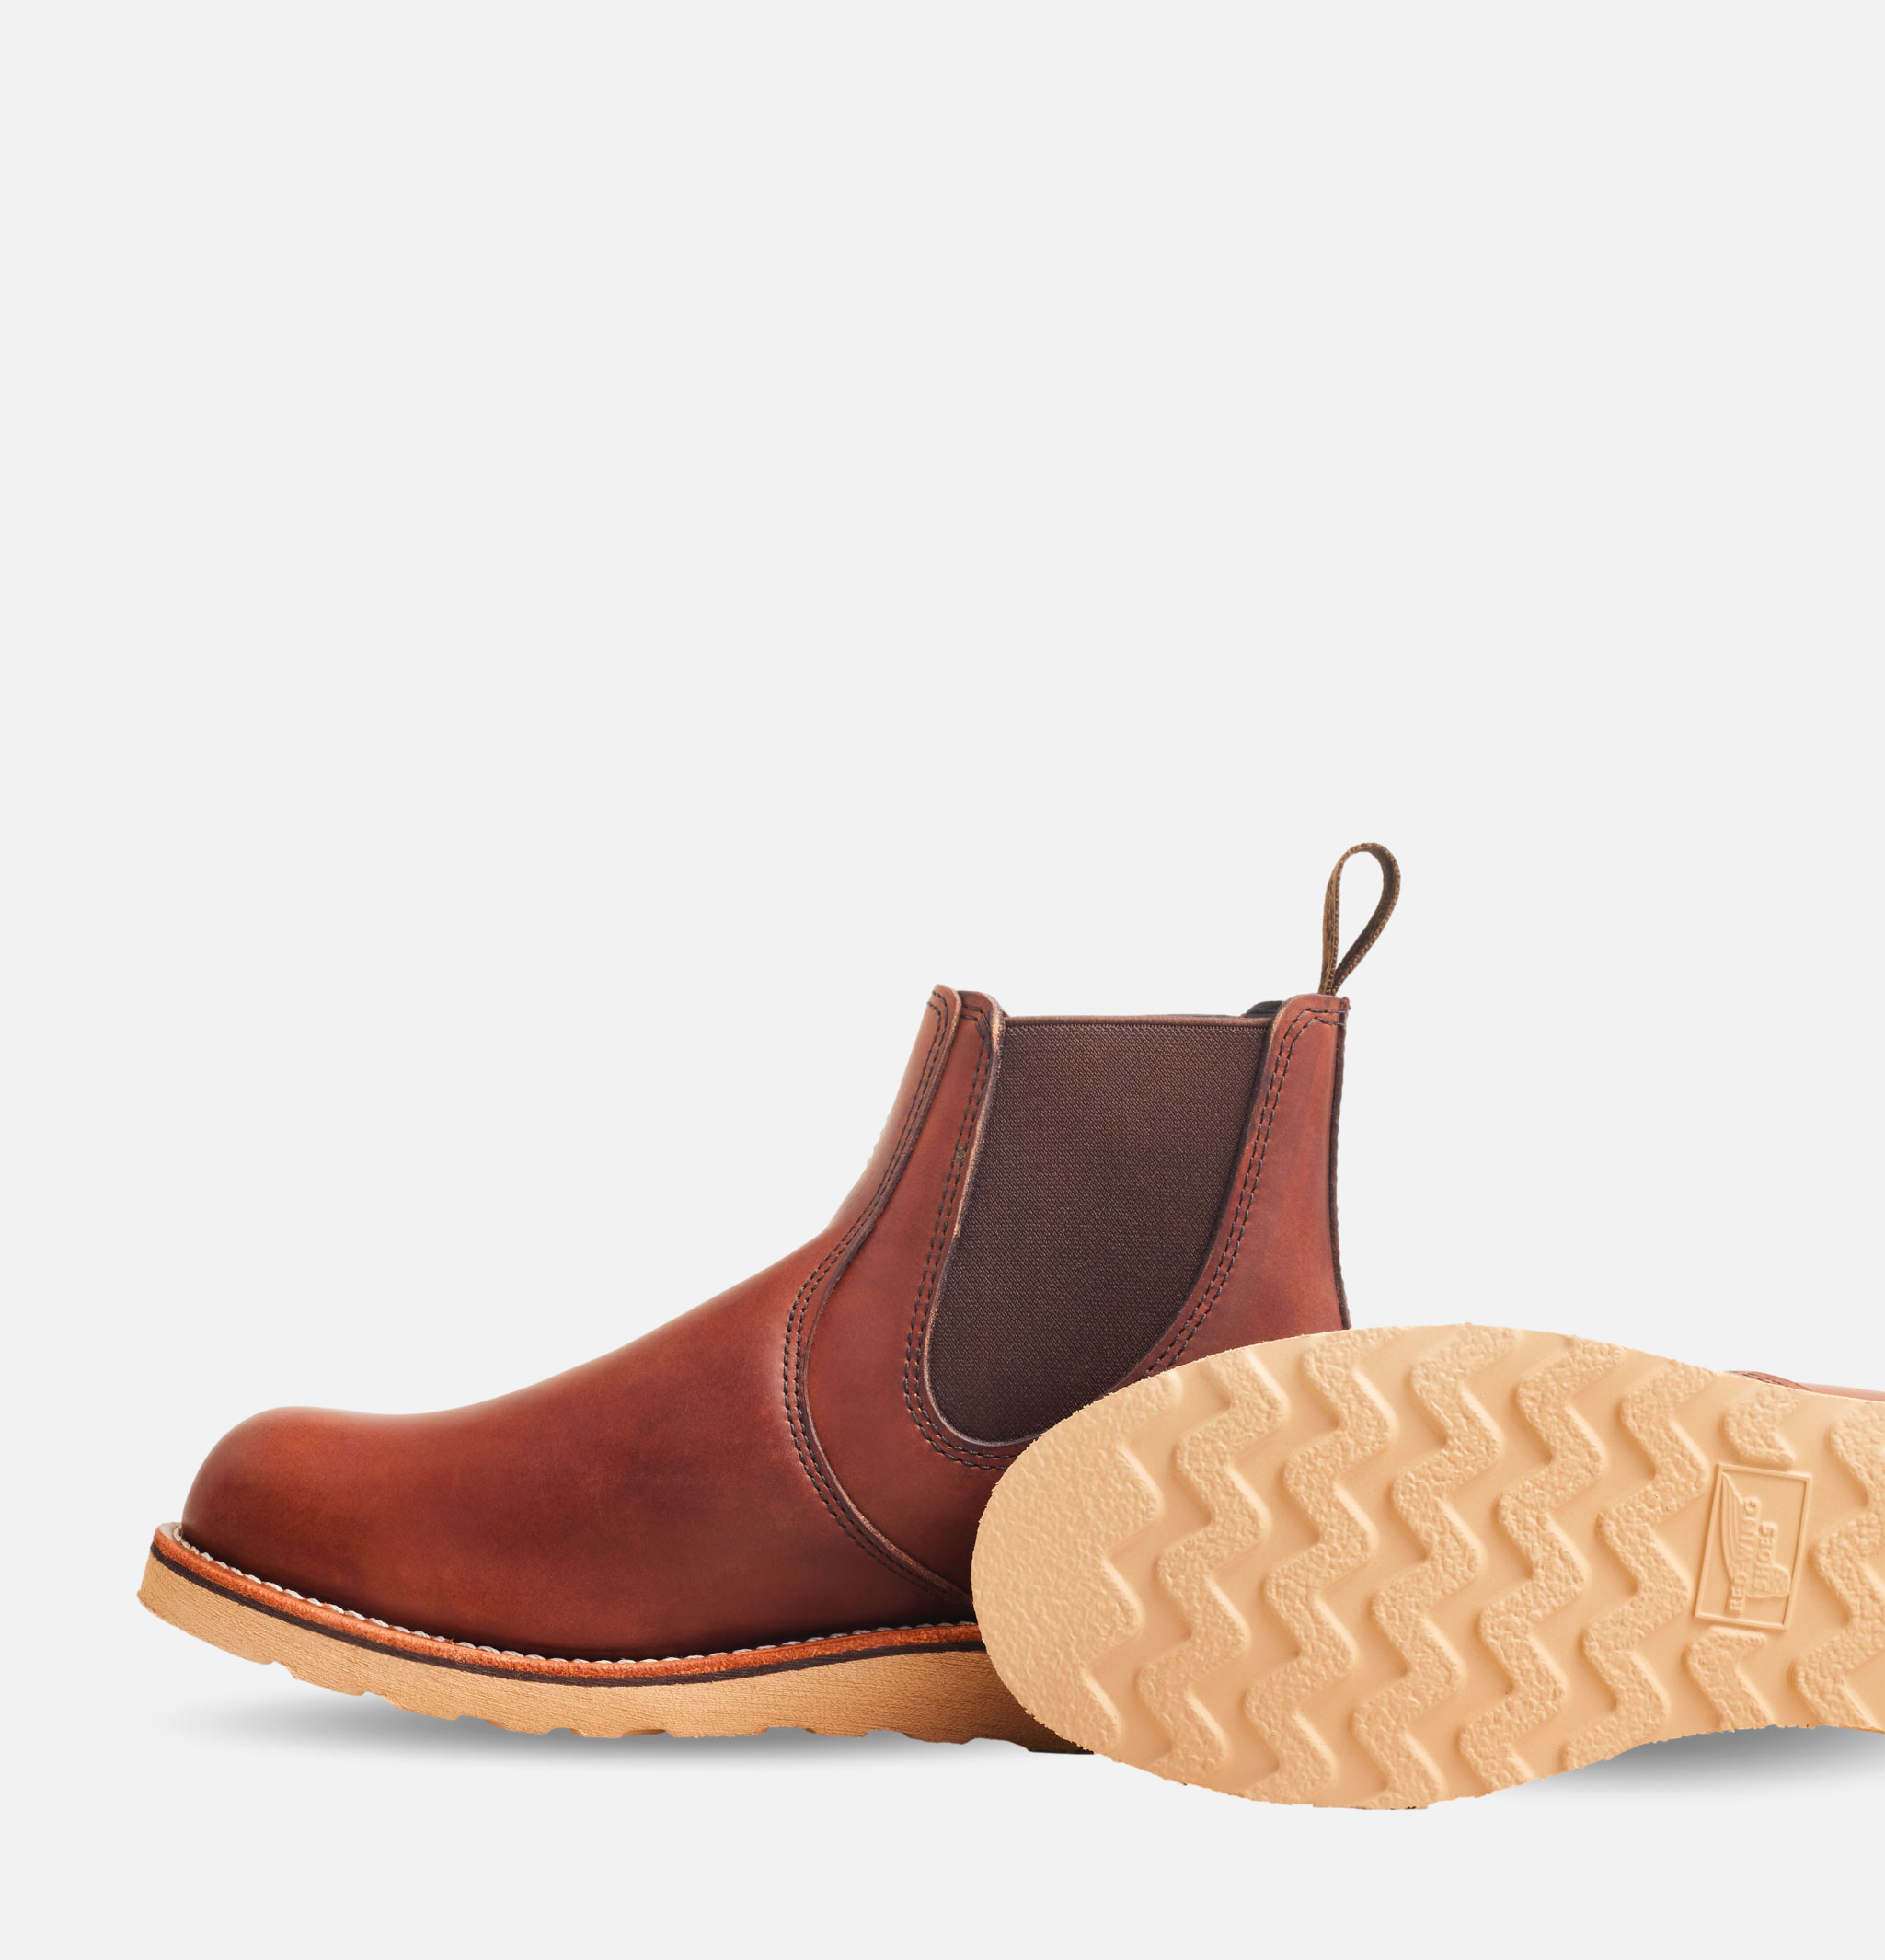 Red Wing Shoes - 3190 - Classic Chelsea Boots - Amber Harness